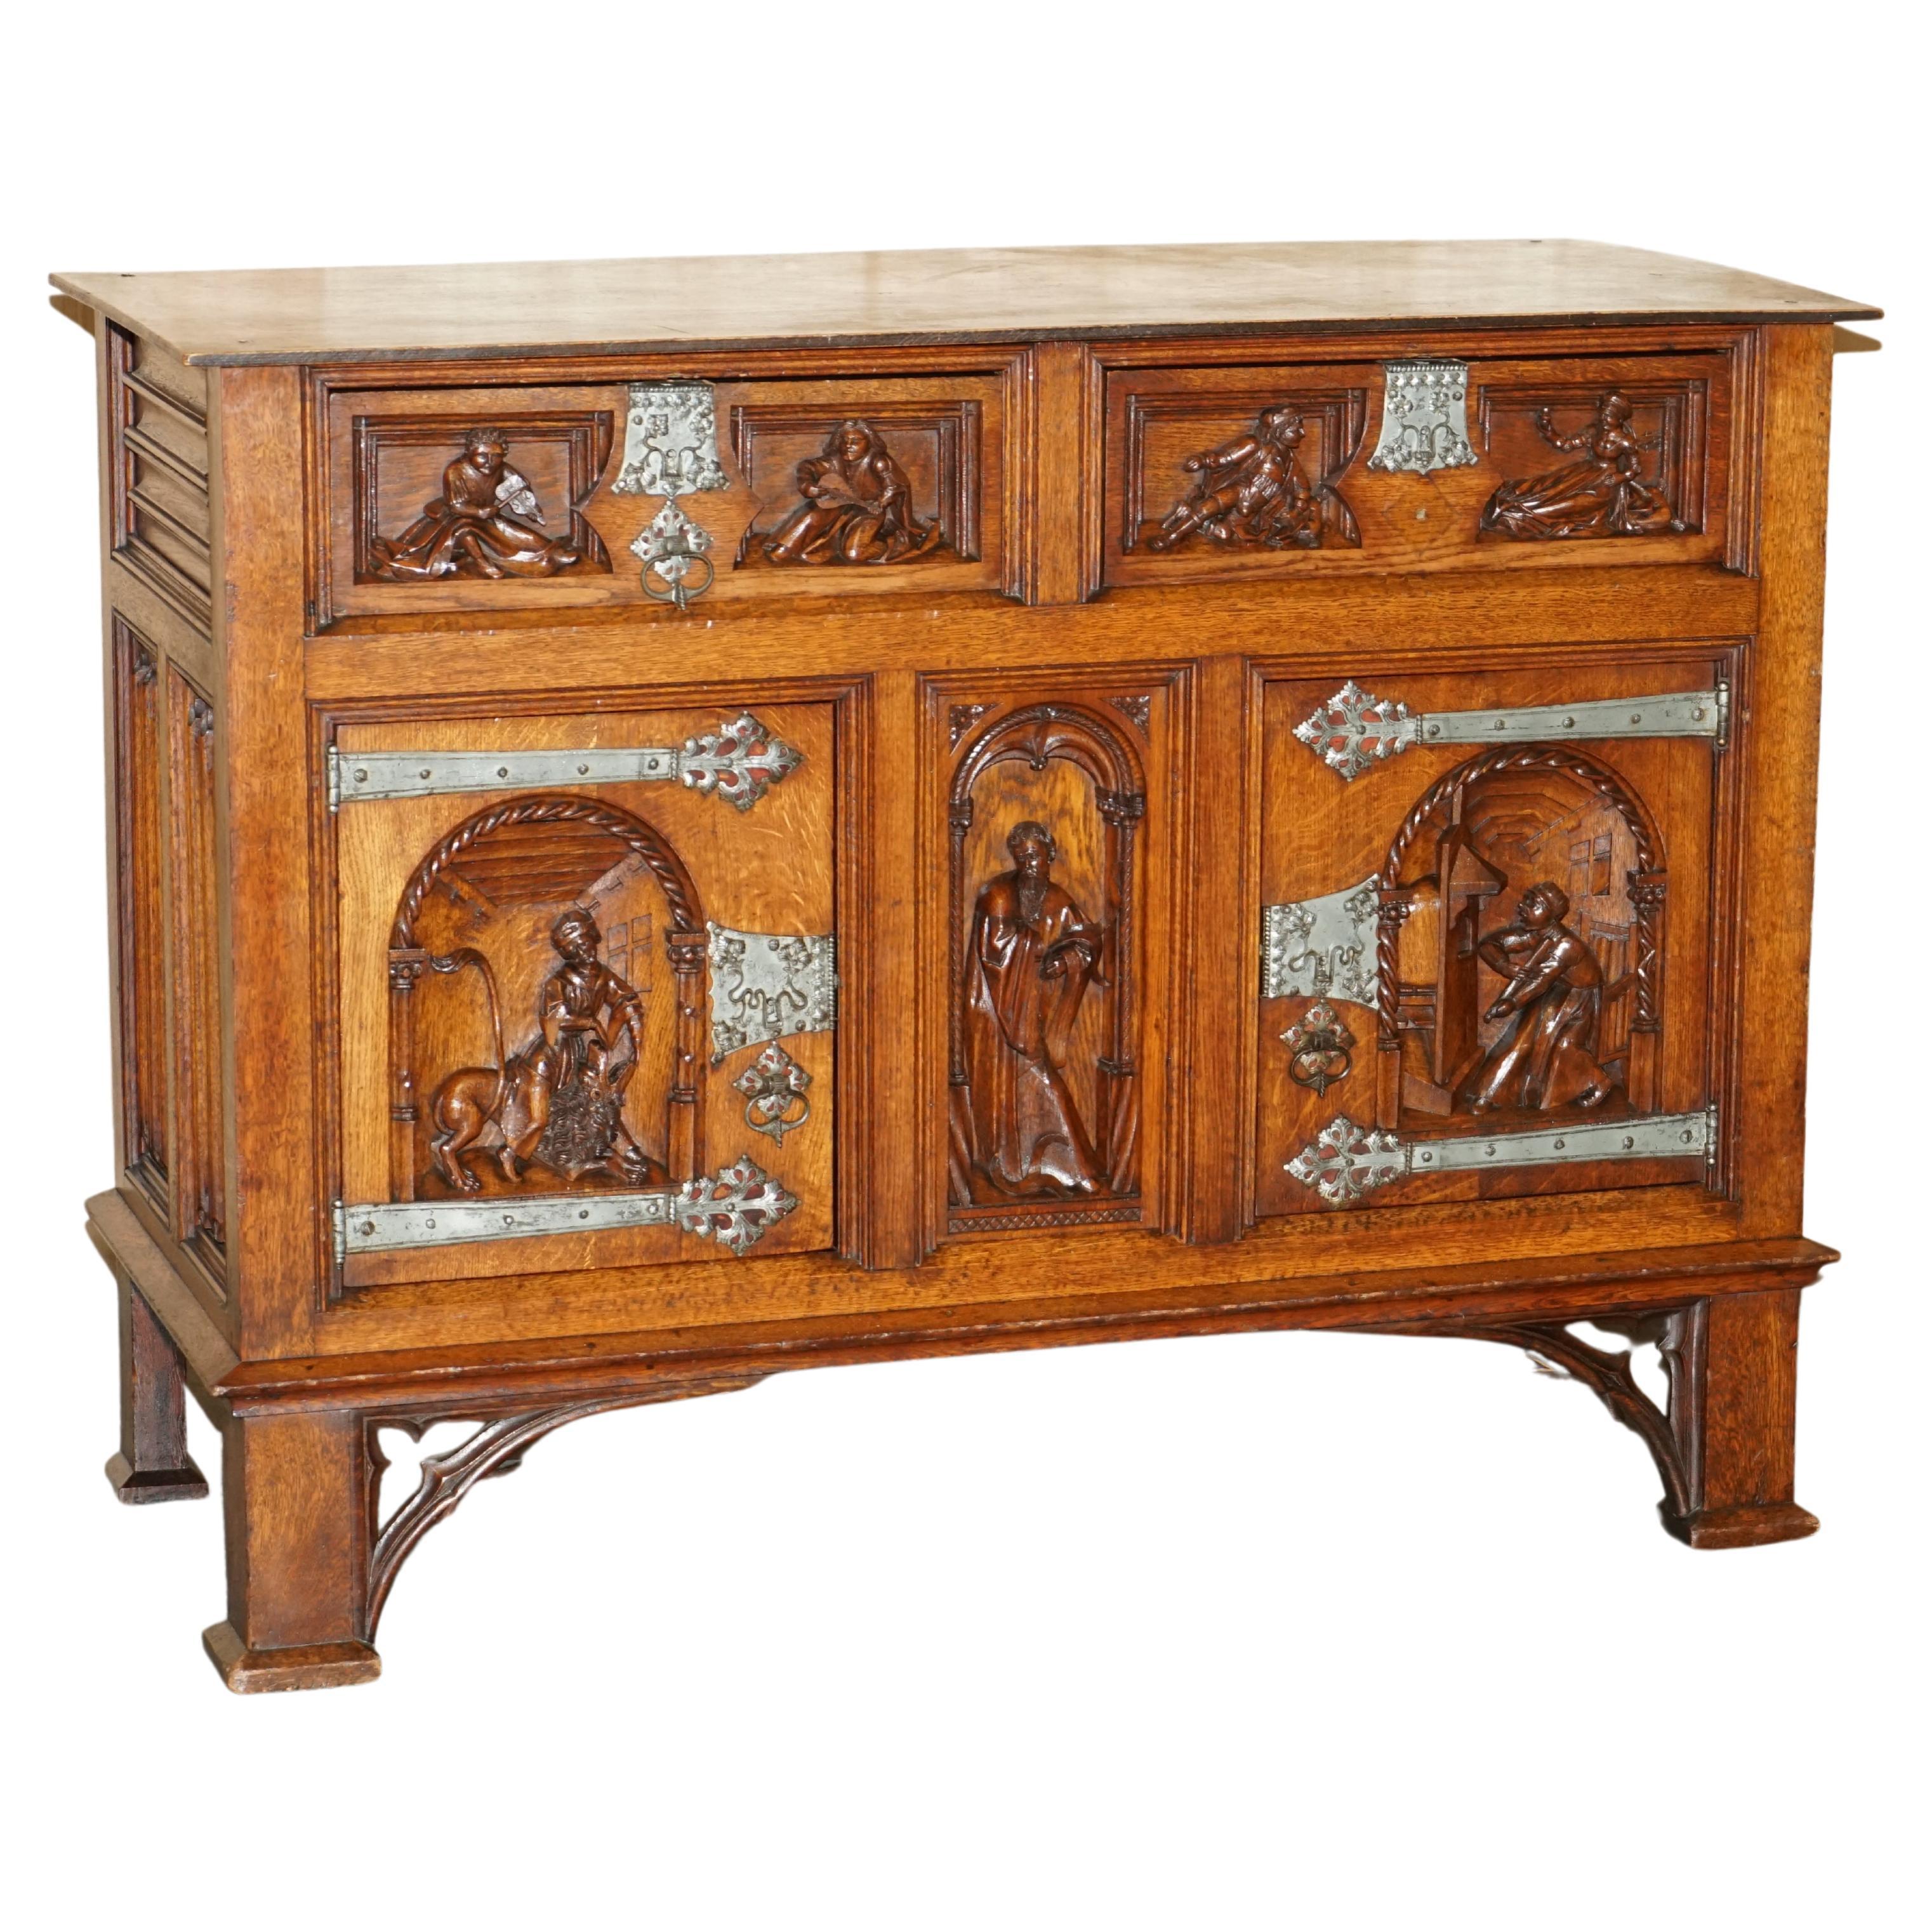 Exquisite Gothic Revival circa 1860 Hand Carved Sideboard Must See Pictures For Sale